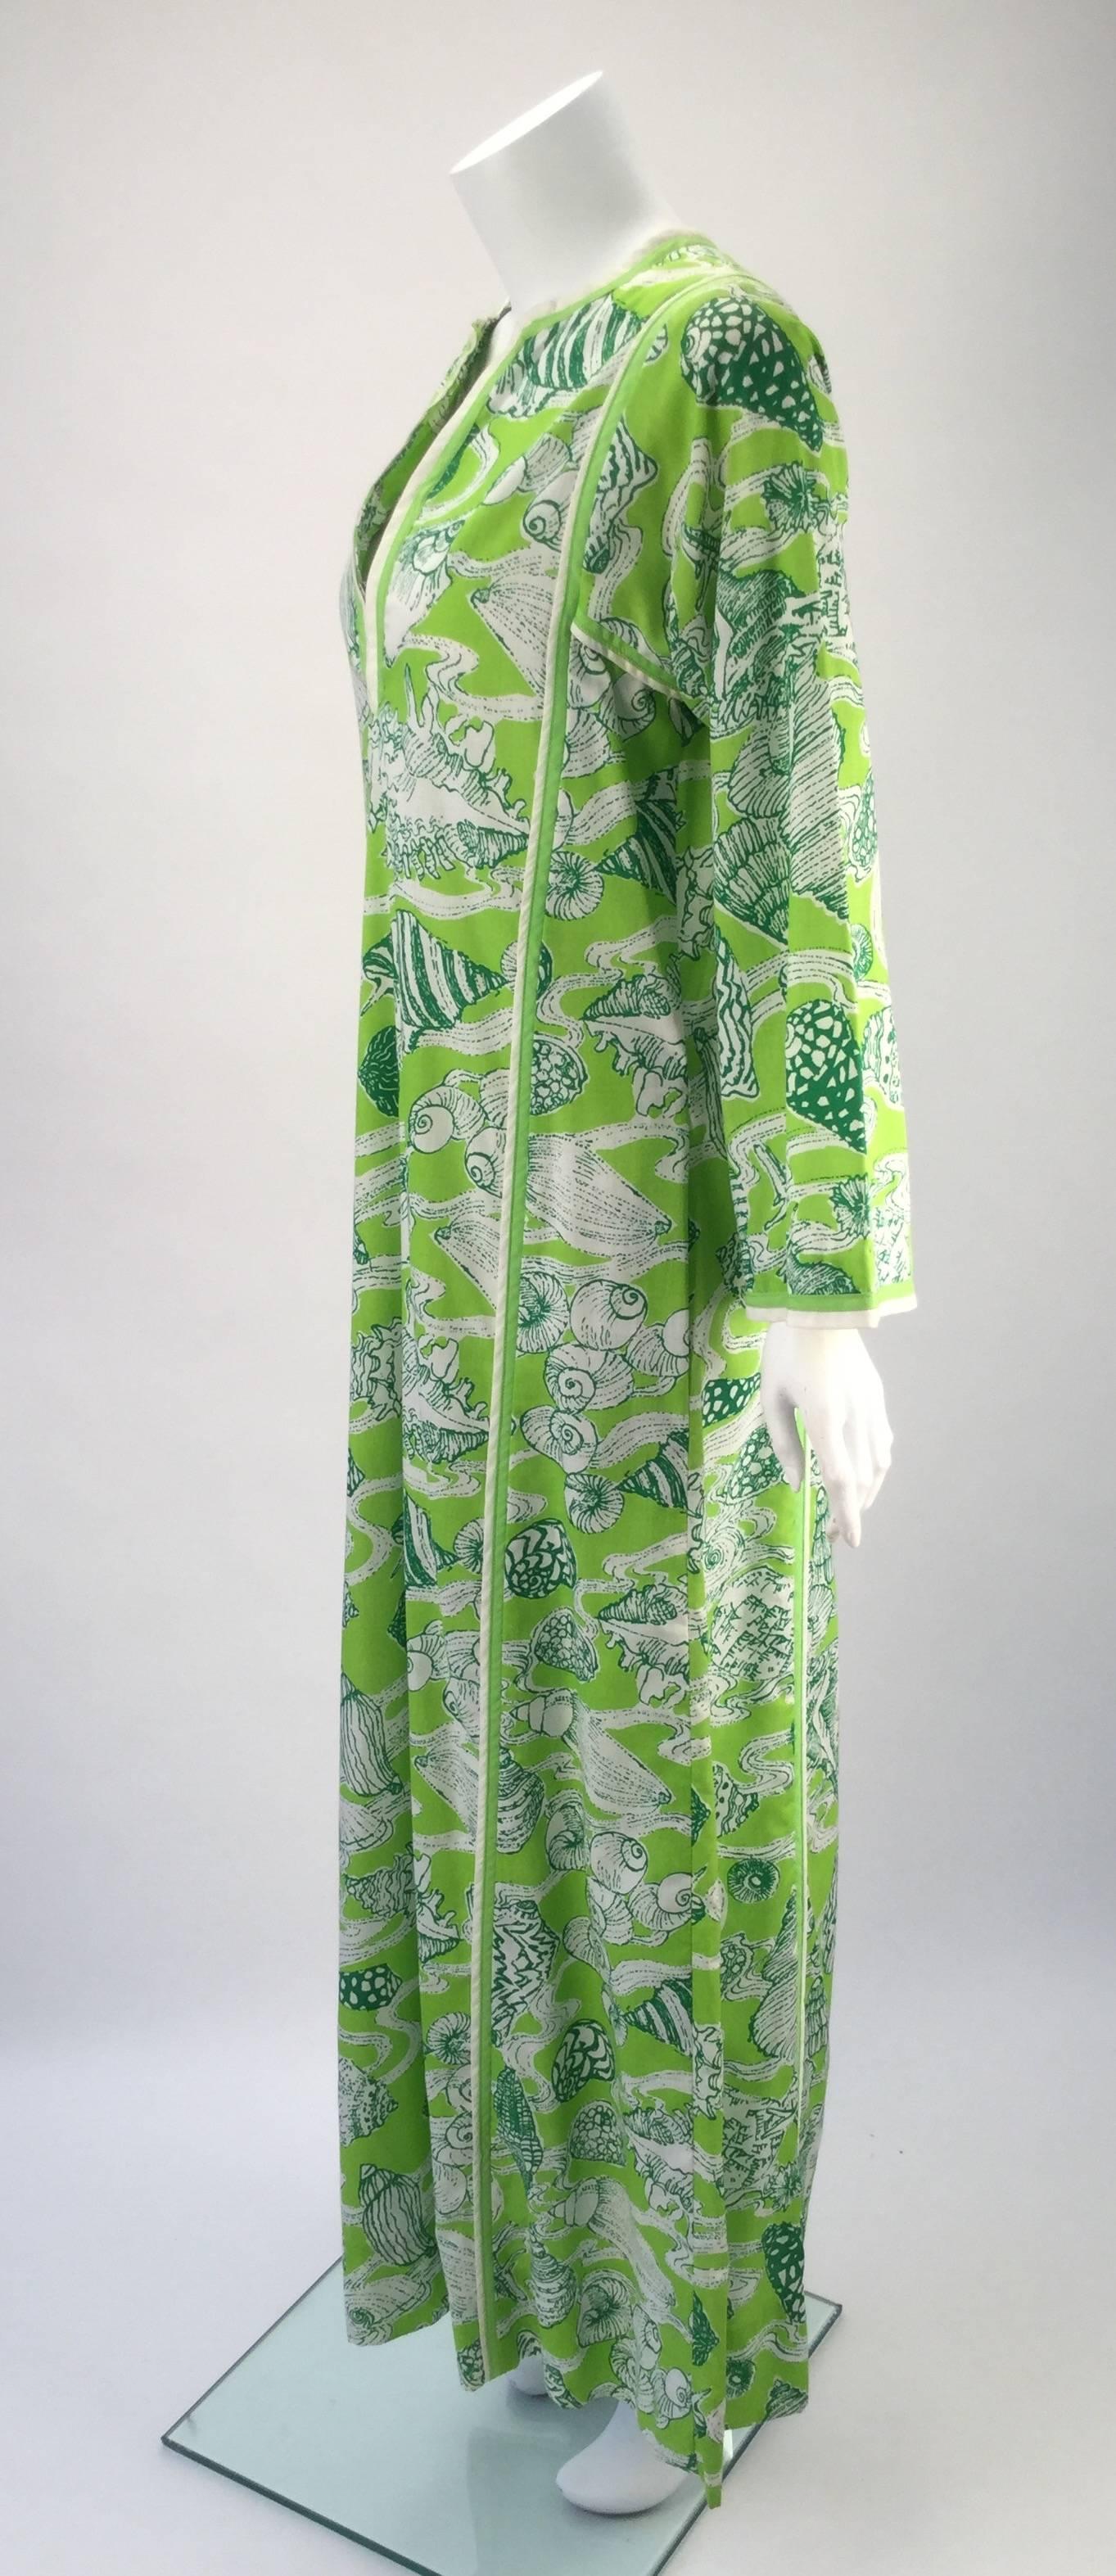 Fantastic early Lilly Pulitzer kaftan from the mid 1960s/early 1970s. The kaftan is lime green with green and white sea shell print.  The front of dress dips into a deep-V that can be closed with two hook and eye closures. Seam binding detail all